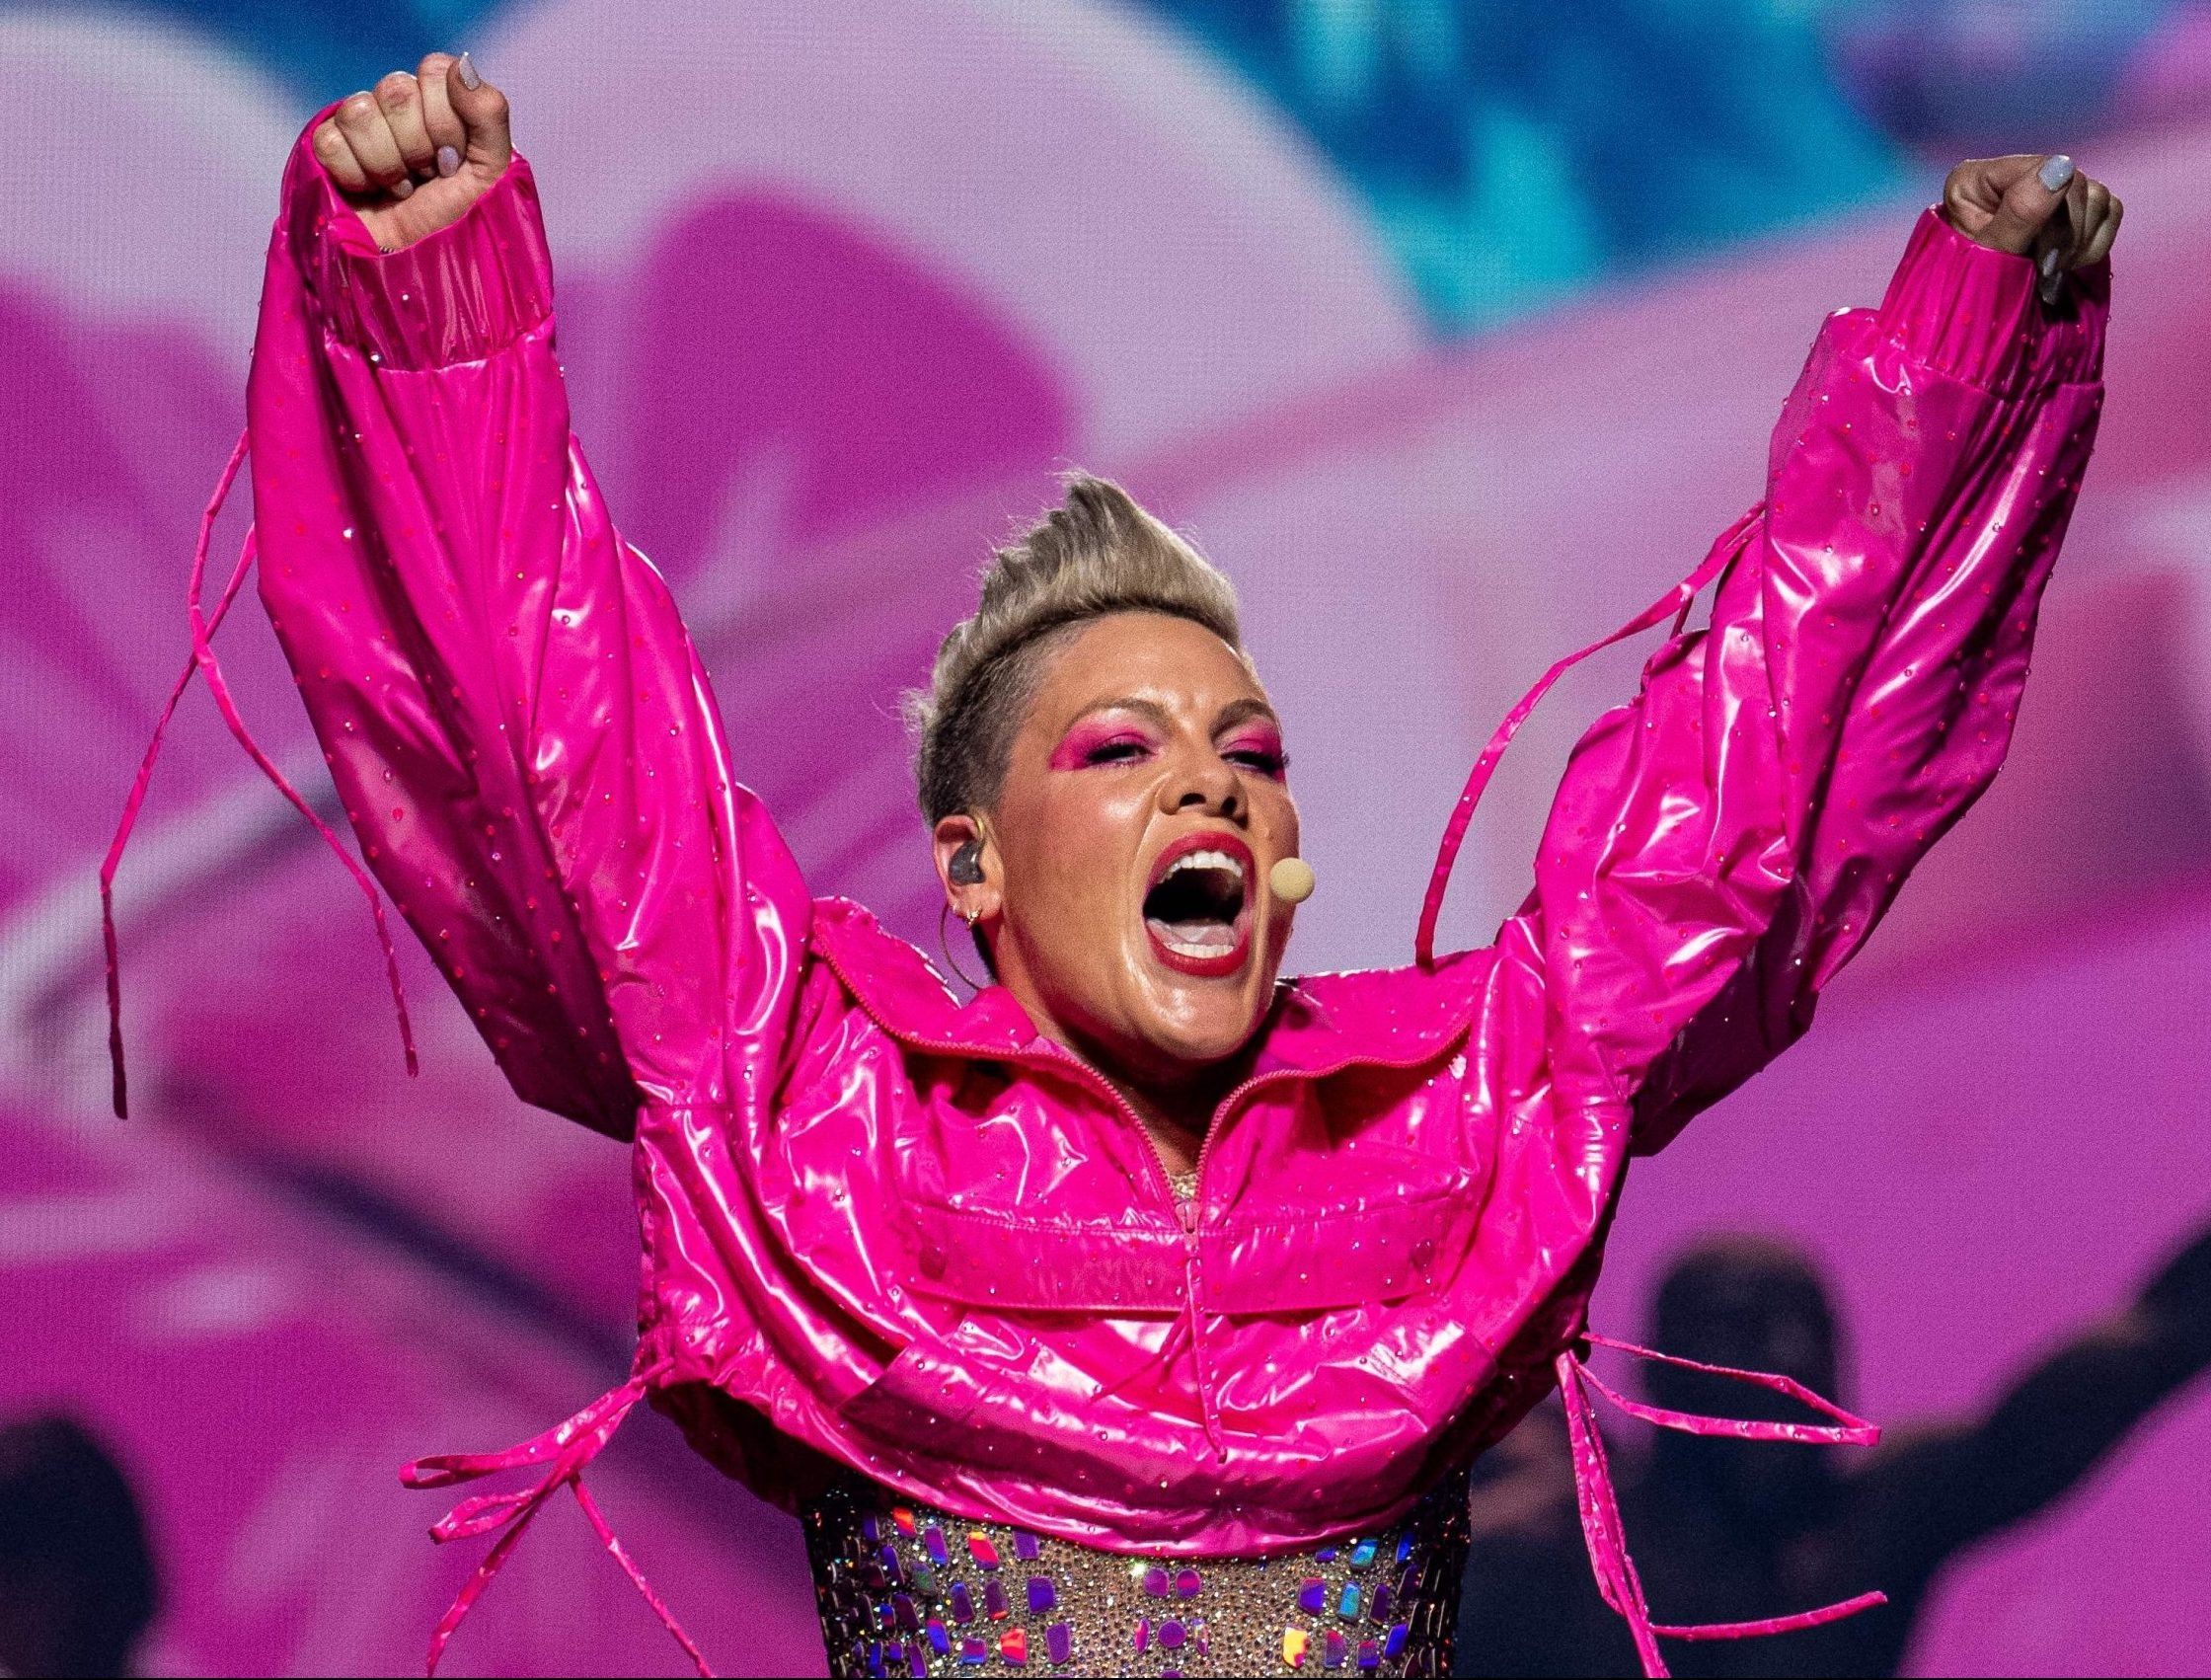 Pink is master of ceremonies at Toronto stop of Summer Carnival tour